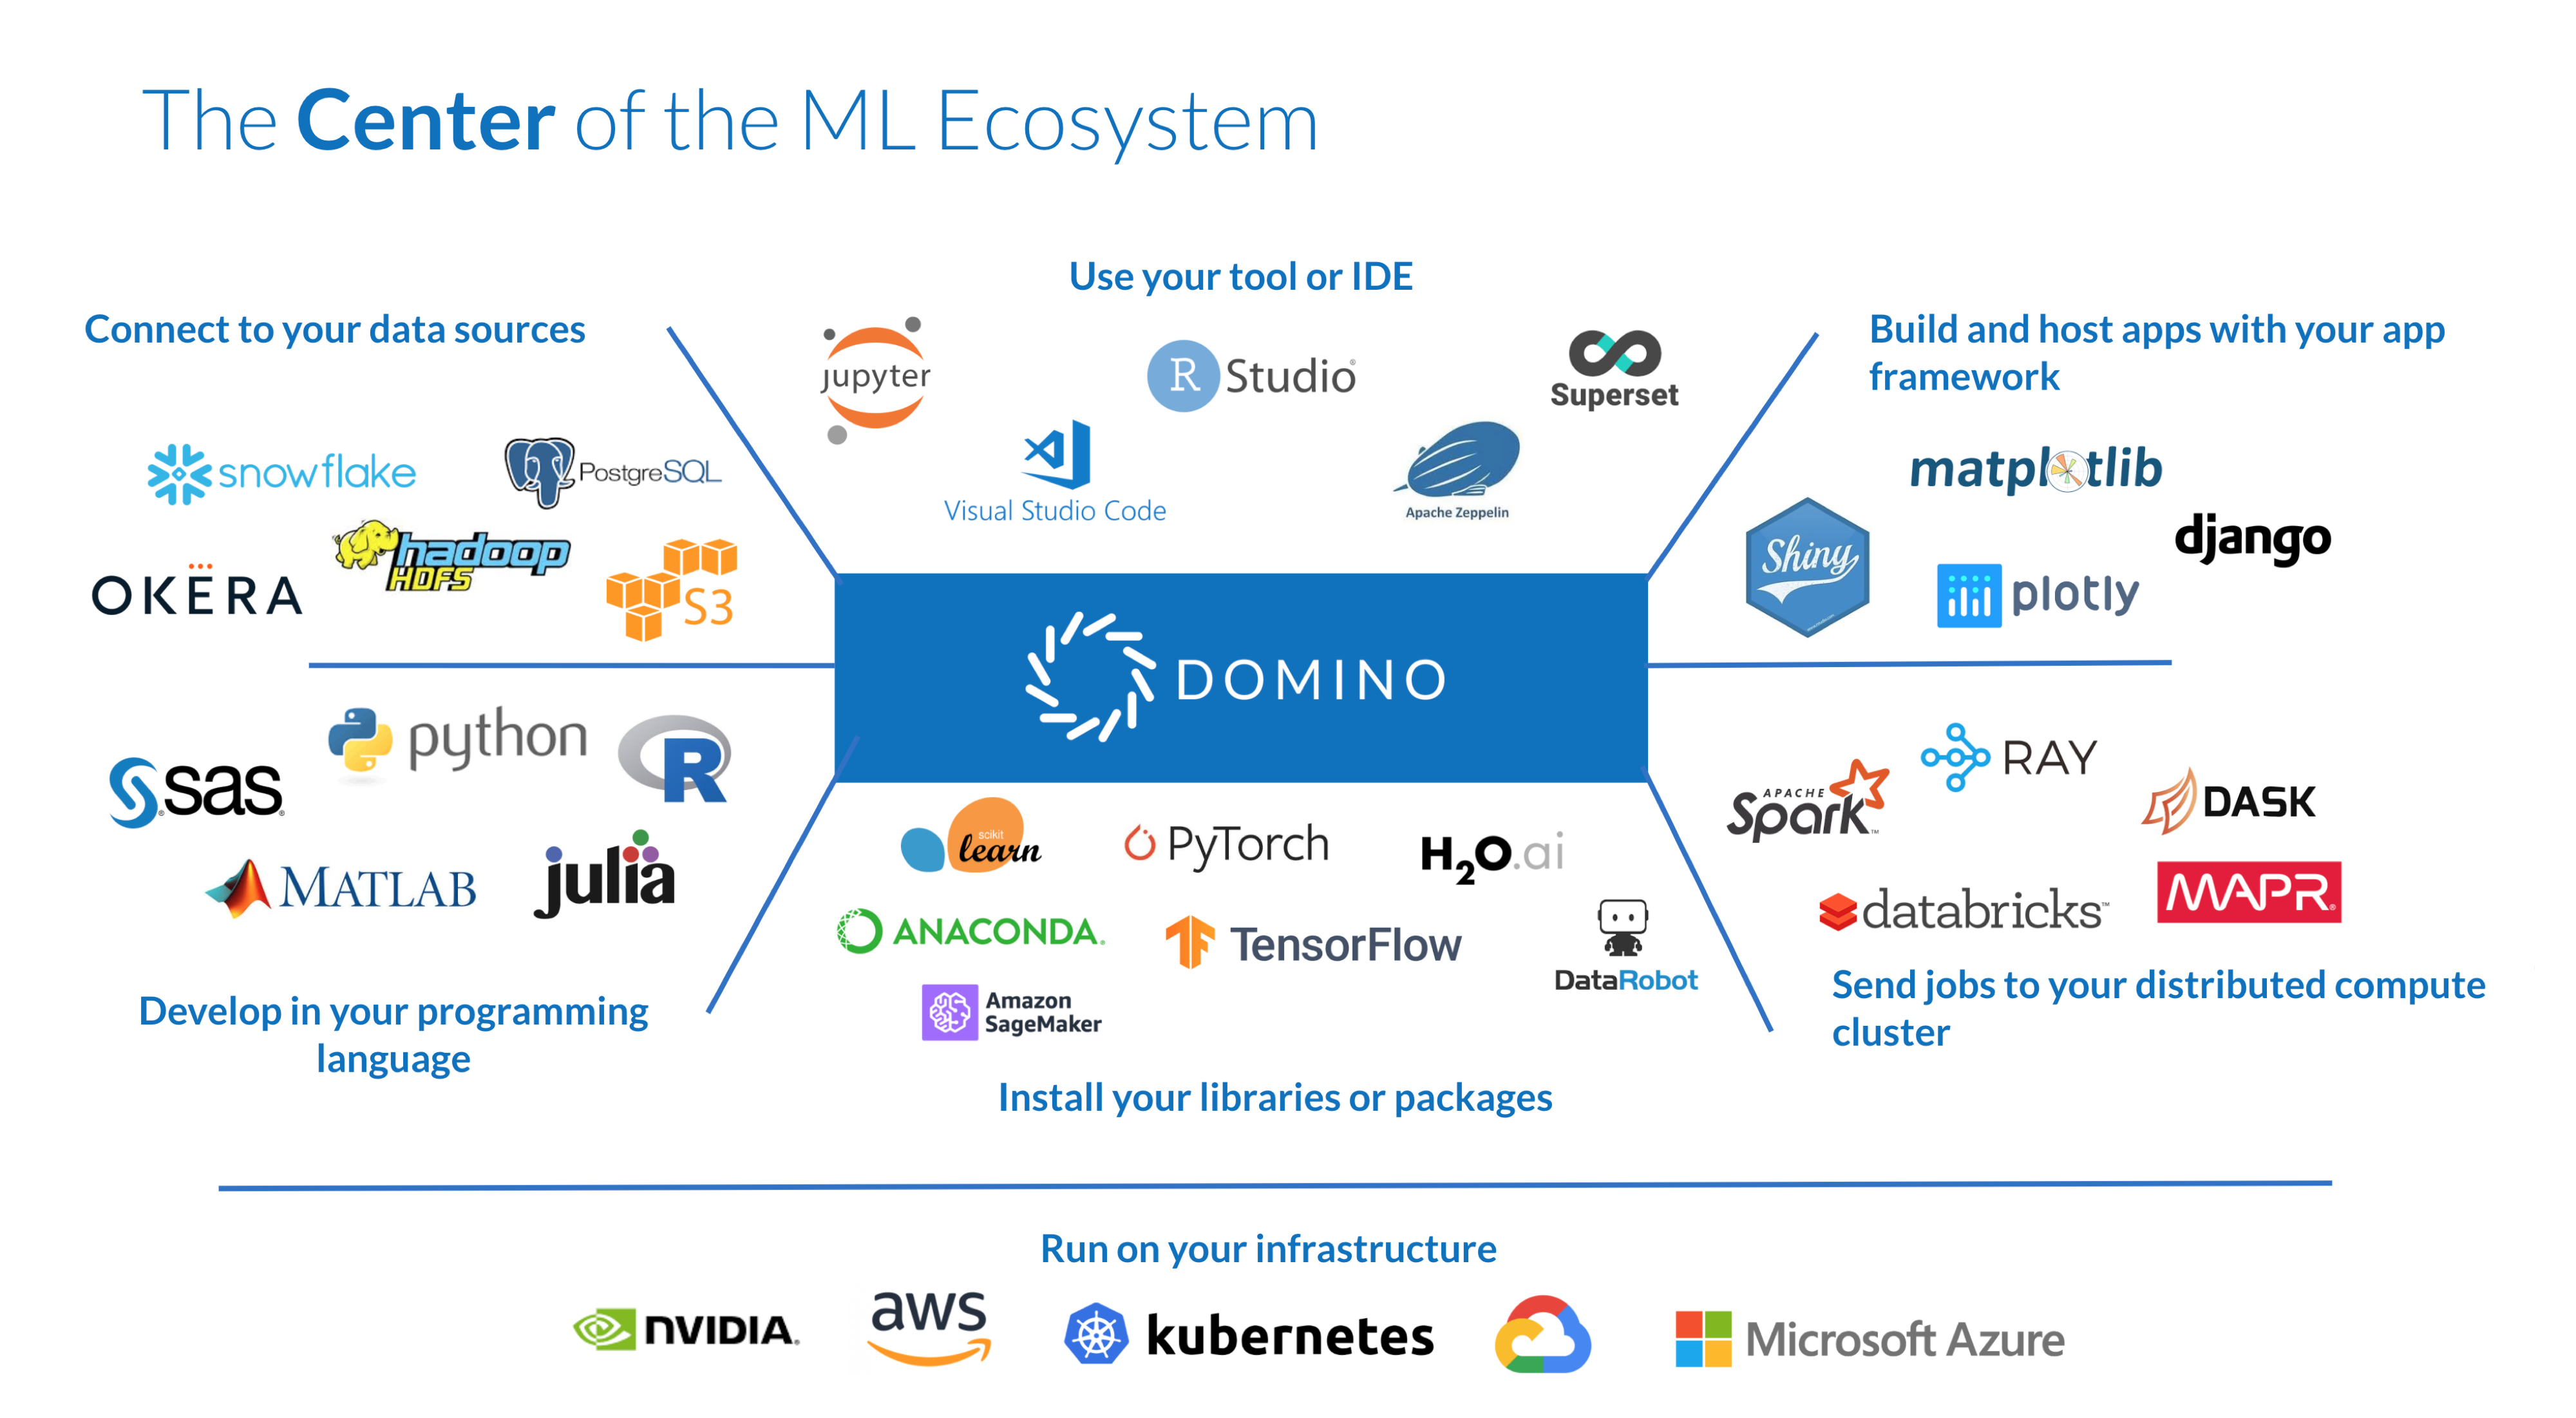 Domino is at the center of the machine learning ecosystem